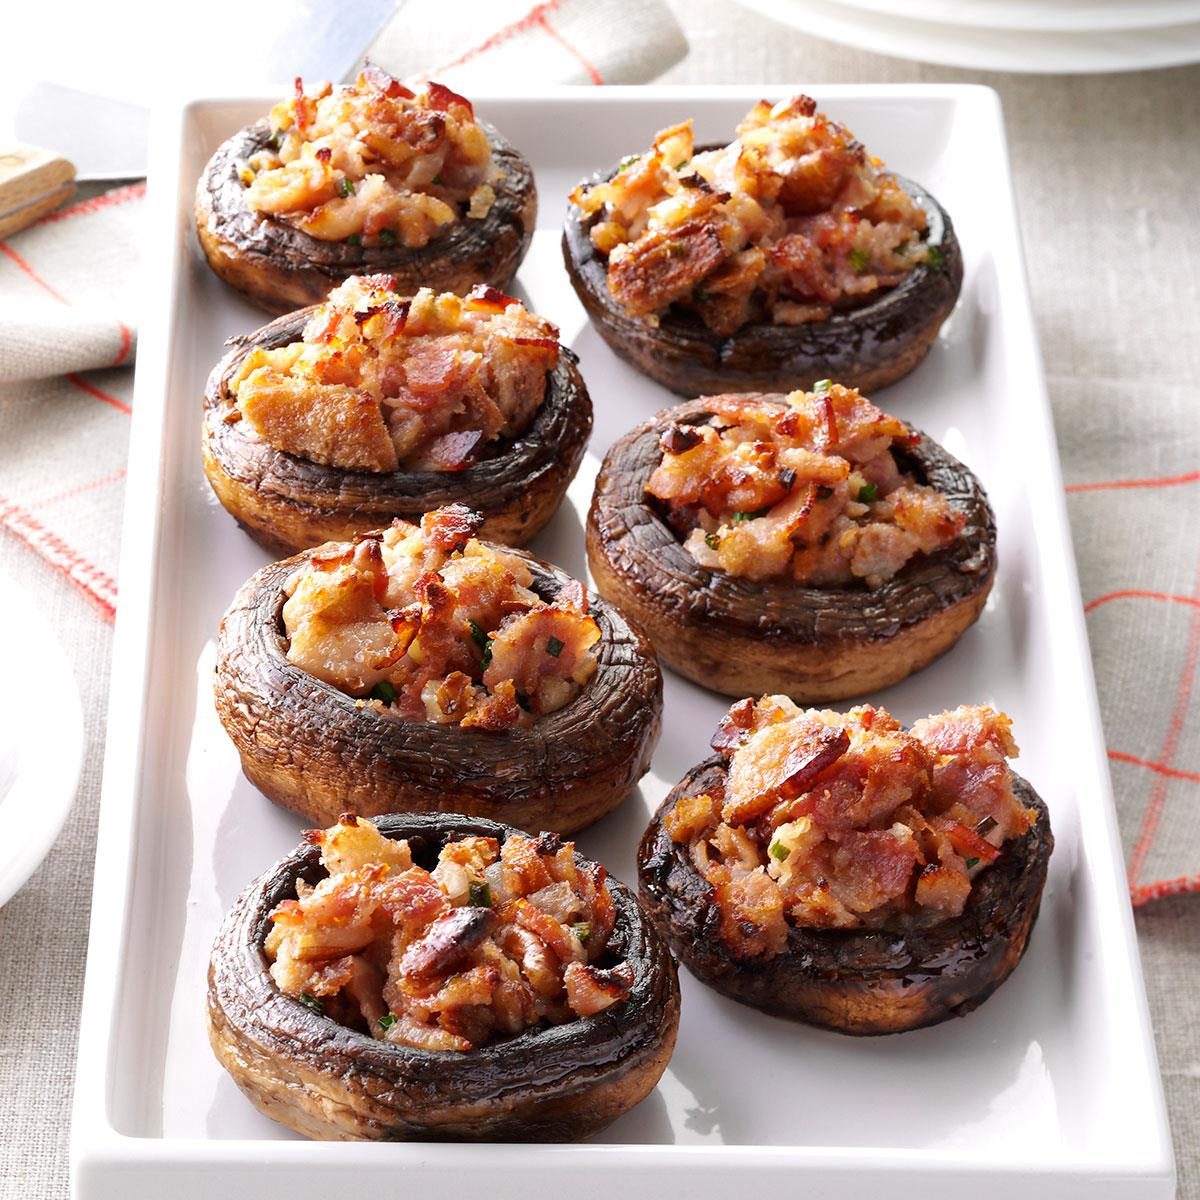 How to make Bacon and Fontina Stuffed Mushrooms